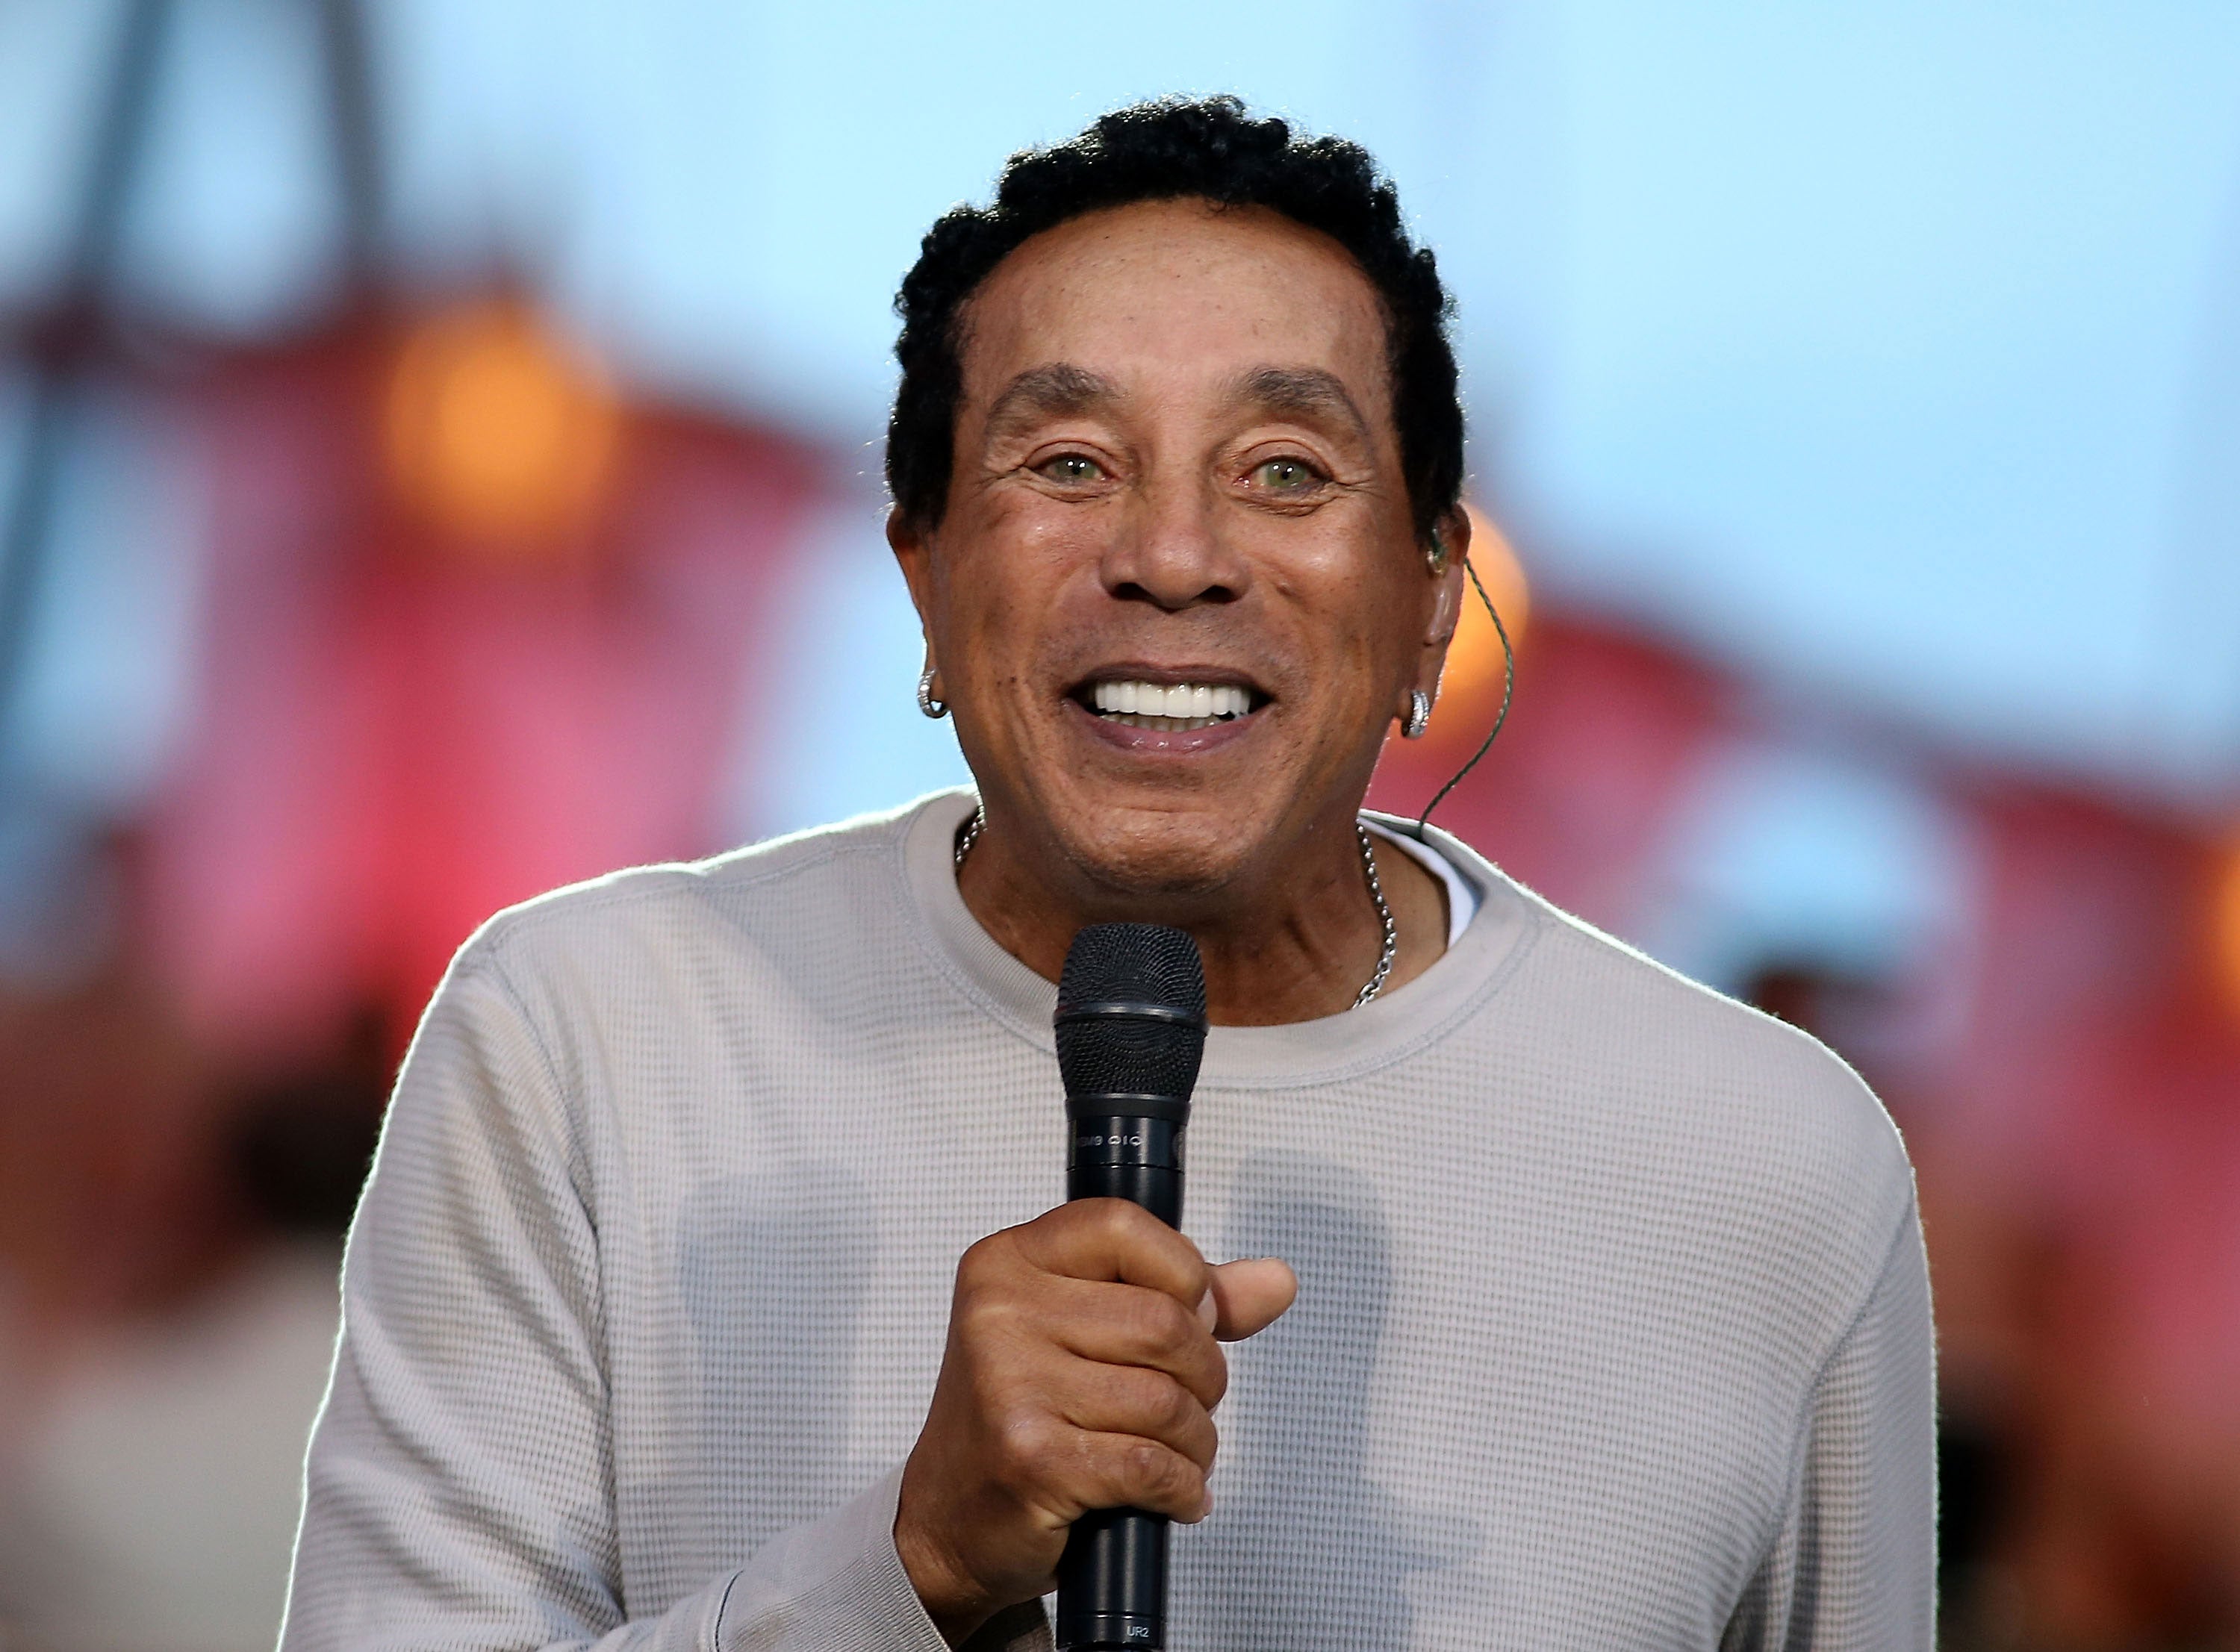 Smokey Robinson Launches Skincare Line Skinphonic, Is it the Secret to his Ageless Look?